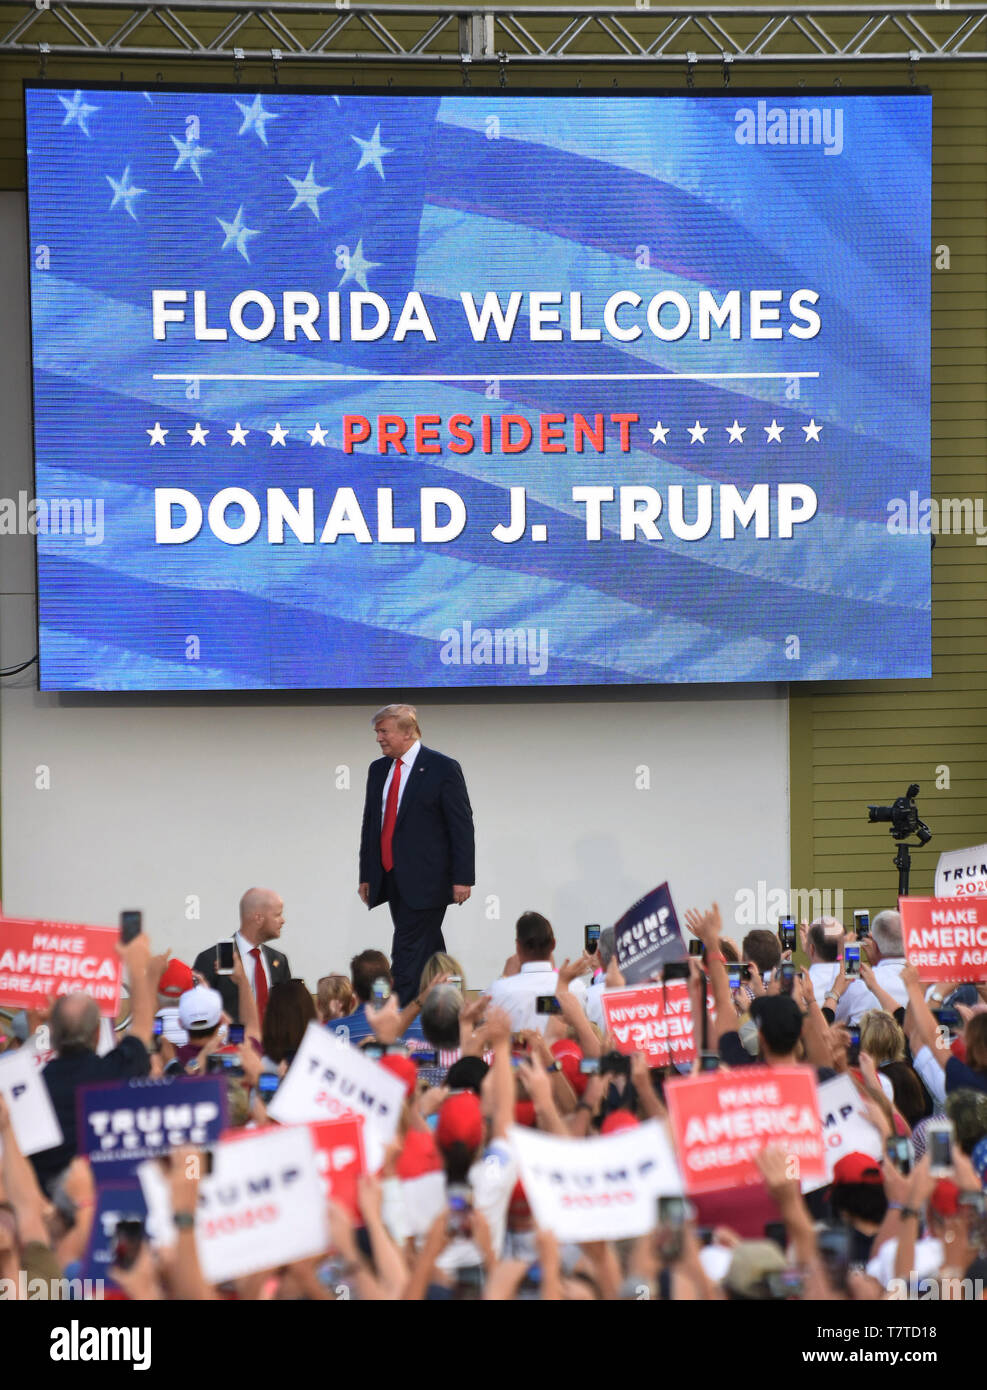 Florida, USA. 08th May, 2019. U.S. President Donald Trump arrives on stage to speak to supporters at a Make America Great Again rally at the Aaron Bessant Park  Amphitheater on May 8, 2019 in Panama City Beach, Florida. Credit: Paul Hennessy/Alamy Live News Stock Photo